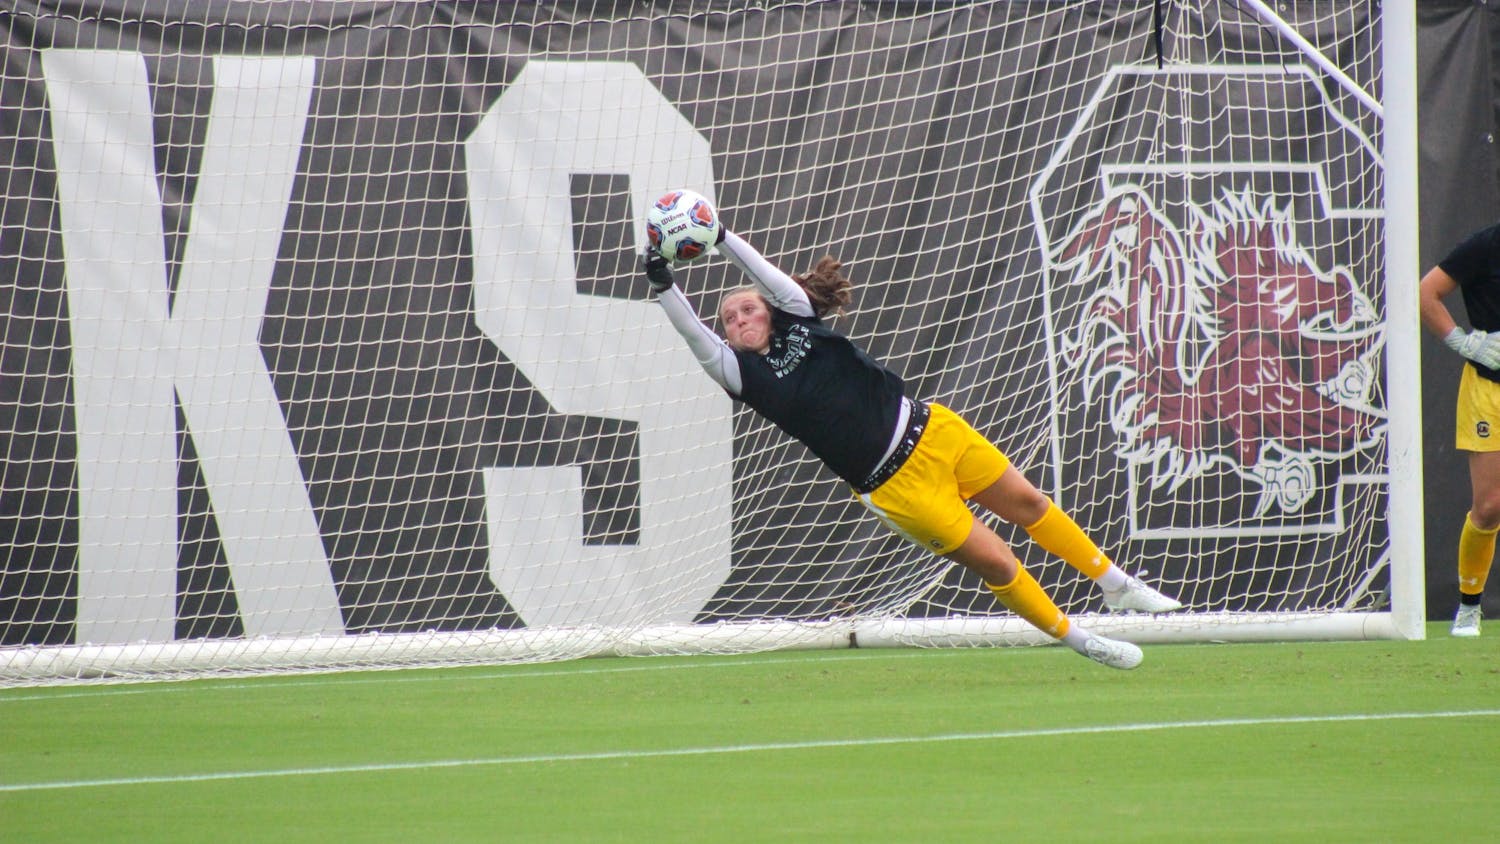 Senior goalkeeper Heather Hinz warming up before the Gamecocks' season opener on August 18, 2022. The No. 4 South Carolina women’s soccer team defeated Connecticut 3-0 in Storrs, Connecticut on Aug. 25.&nbsp;